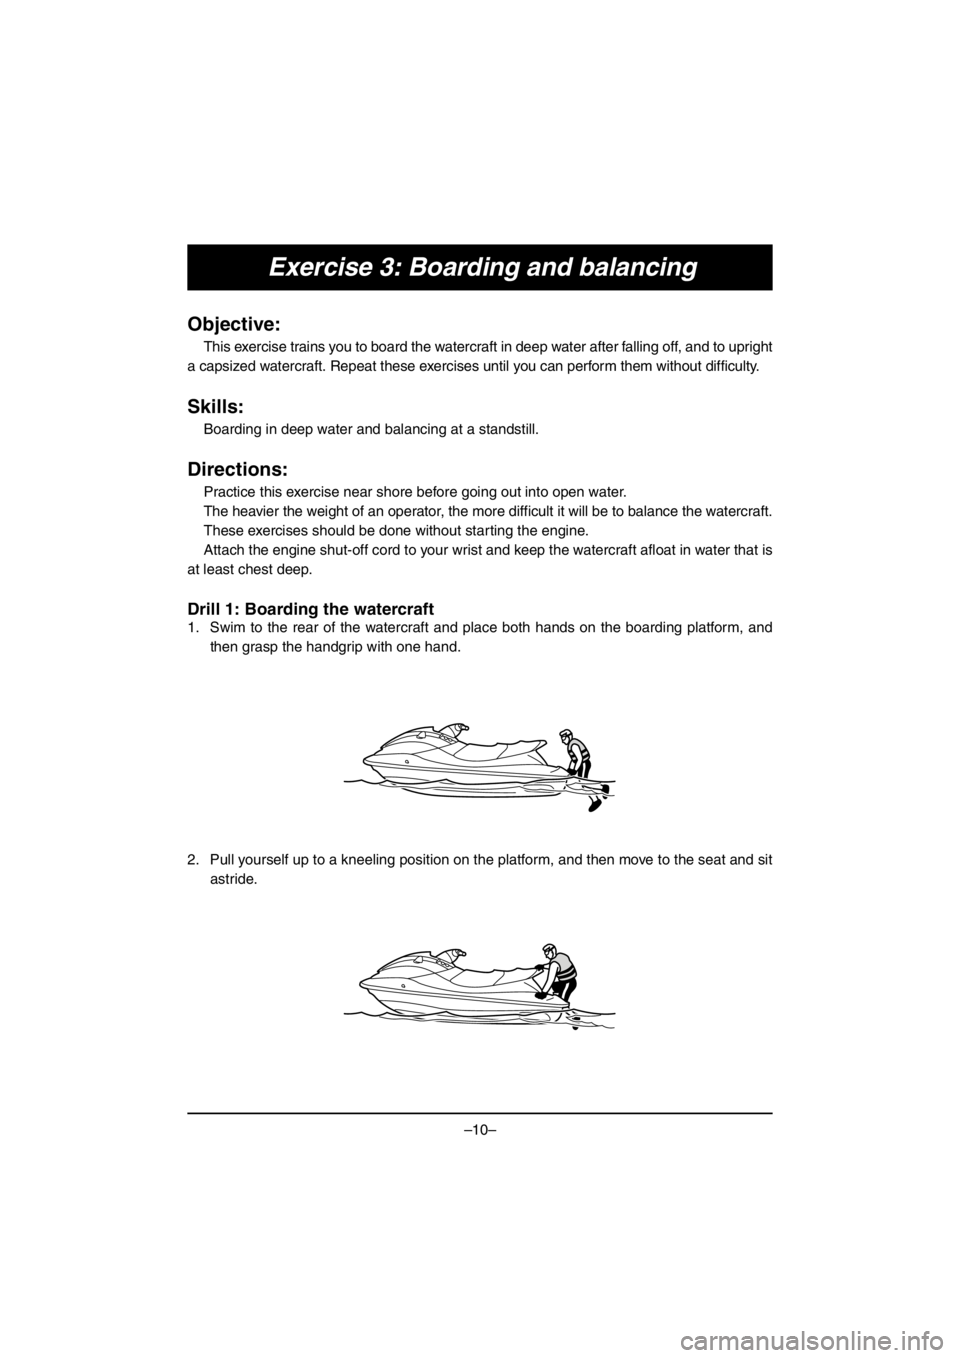 YAMAHA EX 2017  Notices Demploi (in French) –10–
Exercise 3: Boarding and balancing
Objective:
This exercise trains you to board the watercraft in deep water after falling off, and to upright
a capsized watercraft. Repeat these exercises un